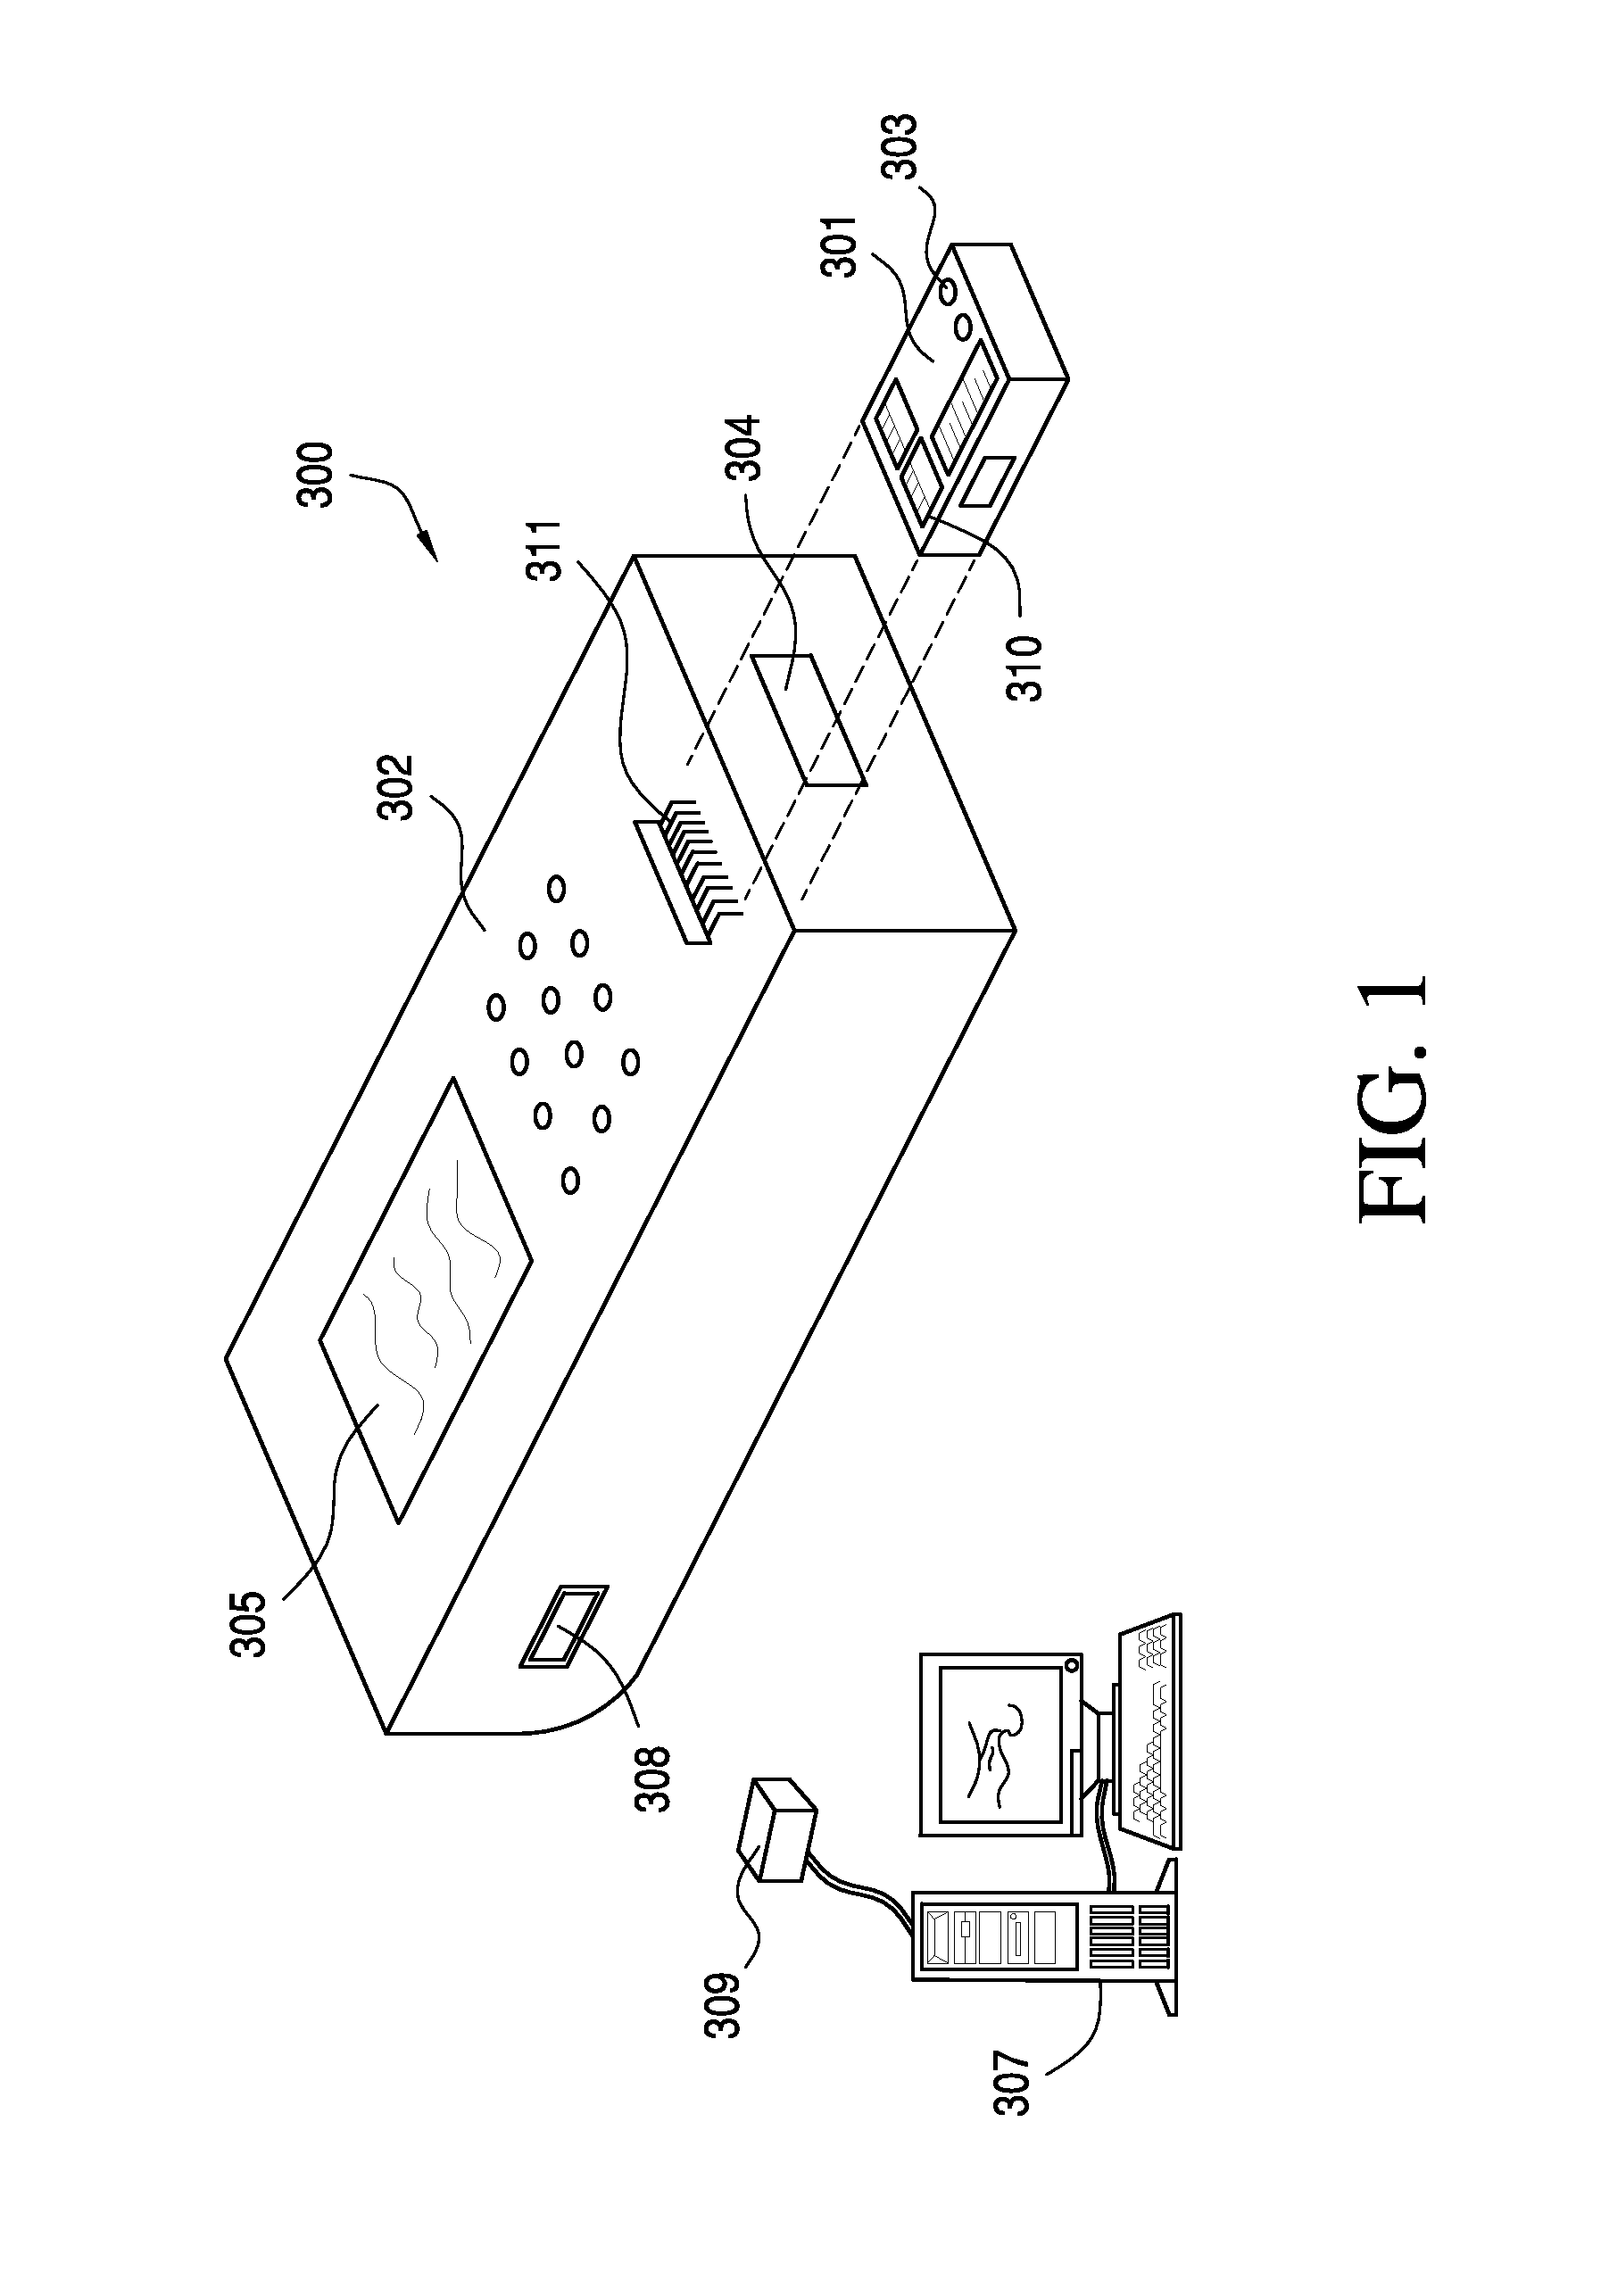 Thermal control system for controlling the temperature of a fluid